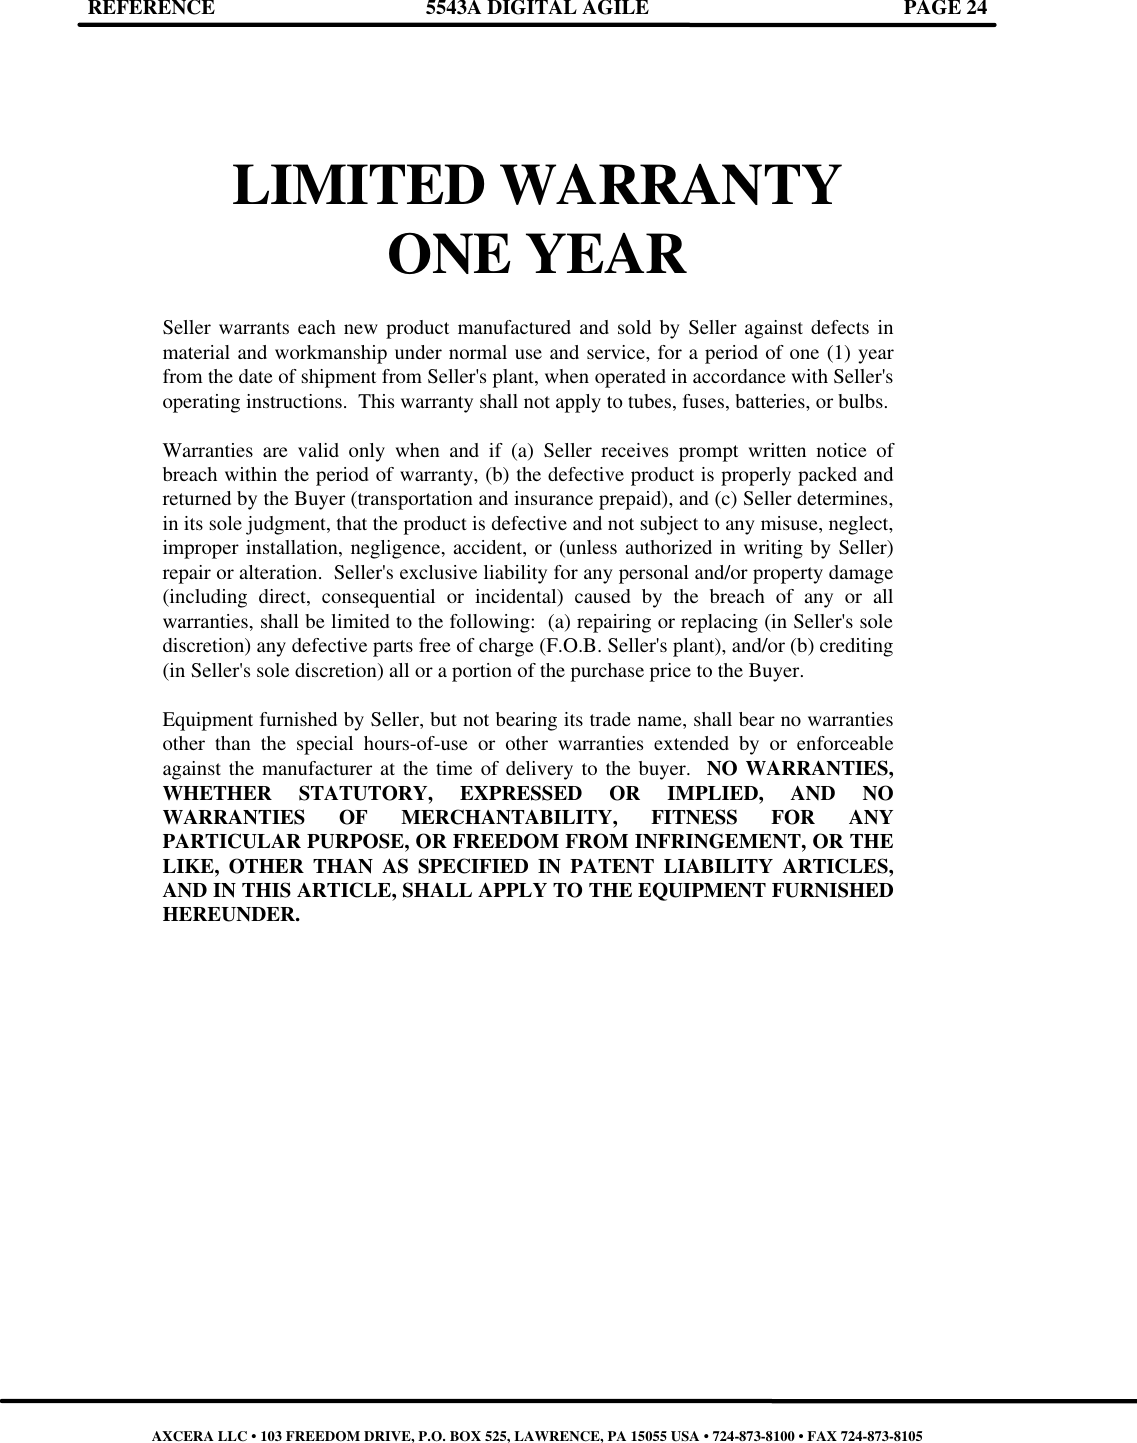 REFERENCE 5543A DIGITAL AGILE PAGE 24      LIMITED WARRANTY  ONE YEAR  Seller warrants each new product manufactured and sold by Seller against defects in material and workmanship under normal use and service, for a period of one (1) year from the date of shipment from Seller&apos;s plant, when operated in accordance with Seller&apos;s operating instructions.  This warranty shall not apply to tubes, fuses, batteries, or bulbs.  Warranties are valid only when and if (a) Seller receives prompt written notice of breach within the period of warranty, (b) the defective product is properly packed and returned by the Buyer (transportation and insurance prepaid), and (c) Seller determines, in its sole judgment, that the product is defective and not subject to any misuse, neglect, improper installation, negligence, accident, or (unless authorized in writing by Seller) repair or alteration.  Seller&apos;s exclusive liability for any personal and/or property damage (including direct, consequential or incidental) caused by the breach of any or all warranties, shall be limited to the following:  (a) repairing or replacing (in Seller&apos;s sole discretion) any defective parts free of charge (F.O.B. Seller&apos;s plant), and/or (b) crediting (in Seller&apos;s sole discretion) all or a portion of the purchase price to the Buyer.  Equipment furnished by Seller, but not bearing its trade name, shall bear no warranties other than the special hours-of-use or other warranties extended by or enforceable against the manufacturer at the time of delivery to the buyer.  NO WARRANTIES, WHETHER STATUTORY, EXPRESSED OR IMPLIED, AND NO WARRANTIES OF MERCHANTABILITY, FITNESS FOR ANY PARTICULAR PURPOSE, OR FREEDOM FROM INFRINGEMENT, OR THE LIKE, OTHER THAN AS SPECIFIED IN PATENT LIABILITY ARTICLES, AND IN THIS ARTICLE, SHALL APPLY TO THE EQUIPMENT FURNISHED HEREUNDER.                                AXCERA LLC • 103 FREEDOM DRIVE, P.O. BOX 525, LAWRENCE, PA 15055 USA • 724-873-8100 • FAX 724-873-8105 